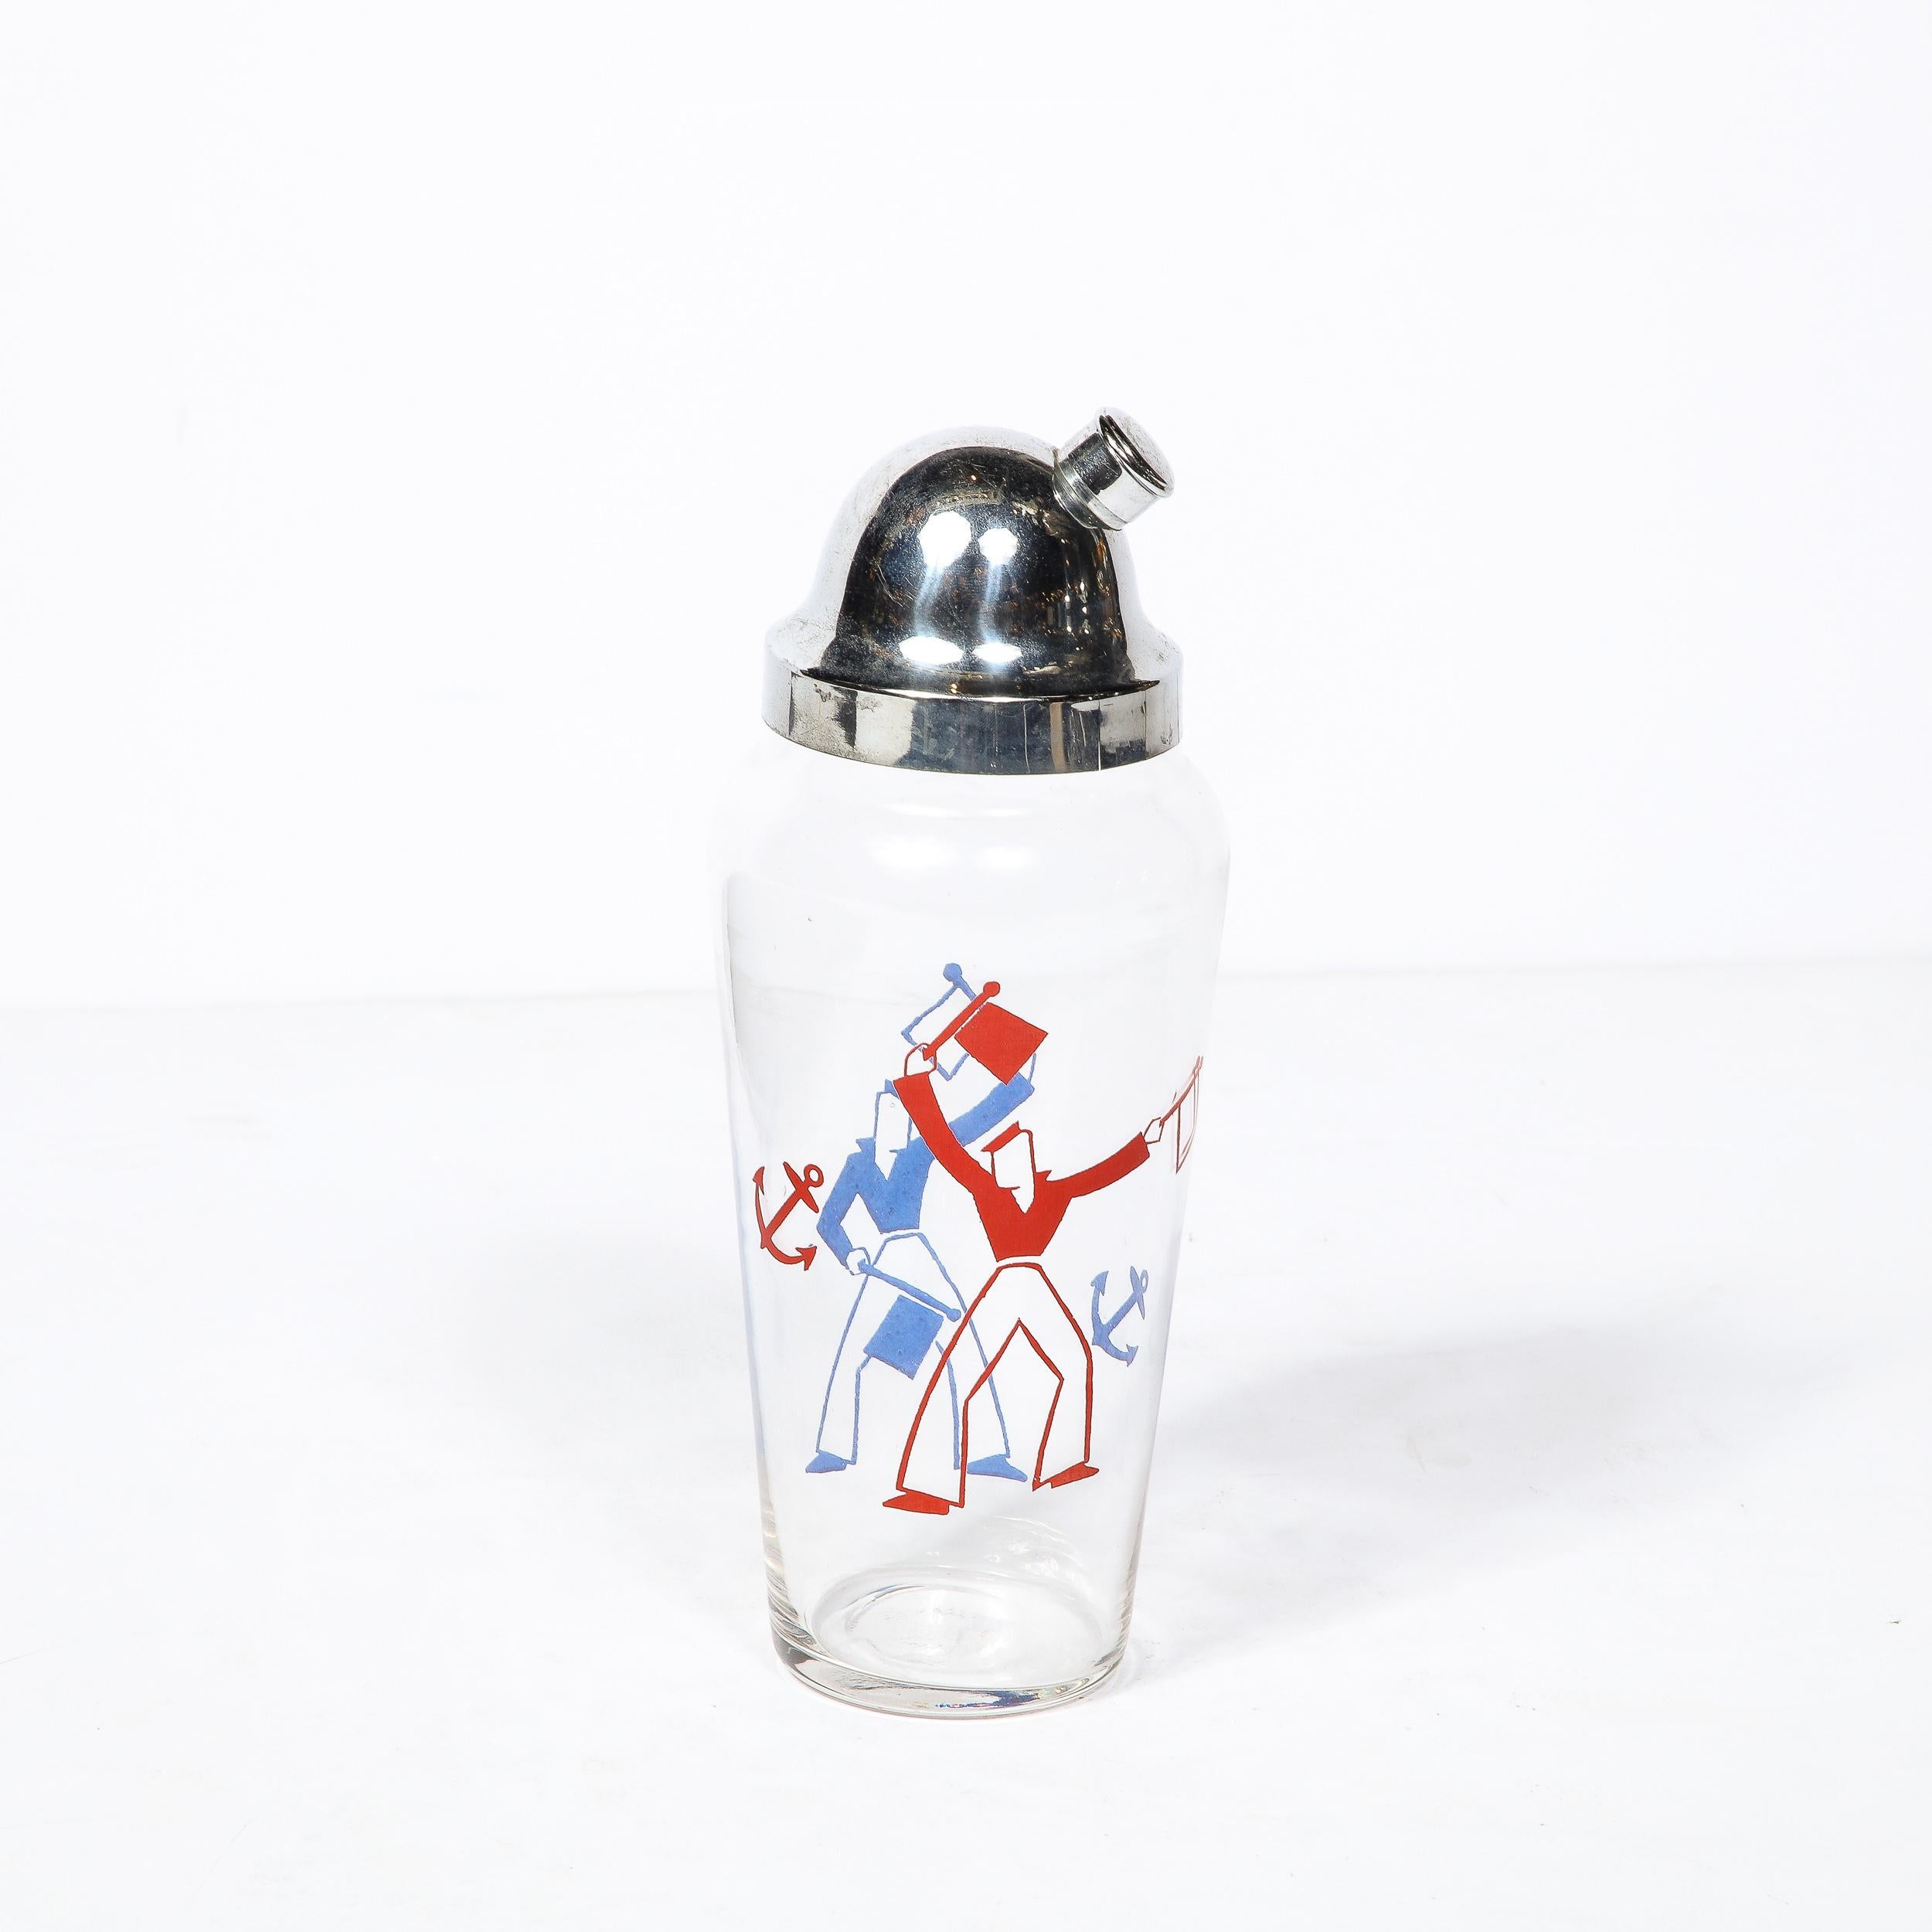 Glass Art Deco Whimsical Cocktail Shaker in Chrome with Sailors in Red and Blue 